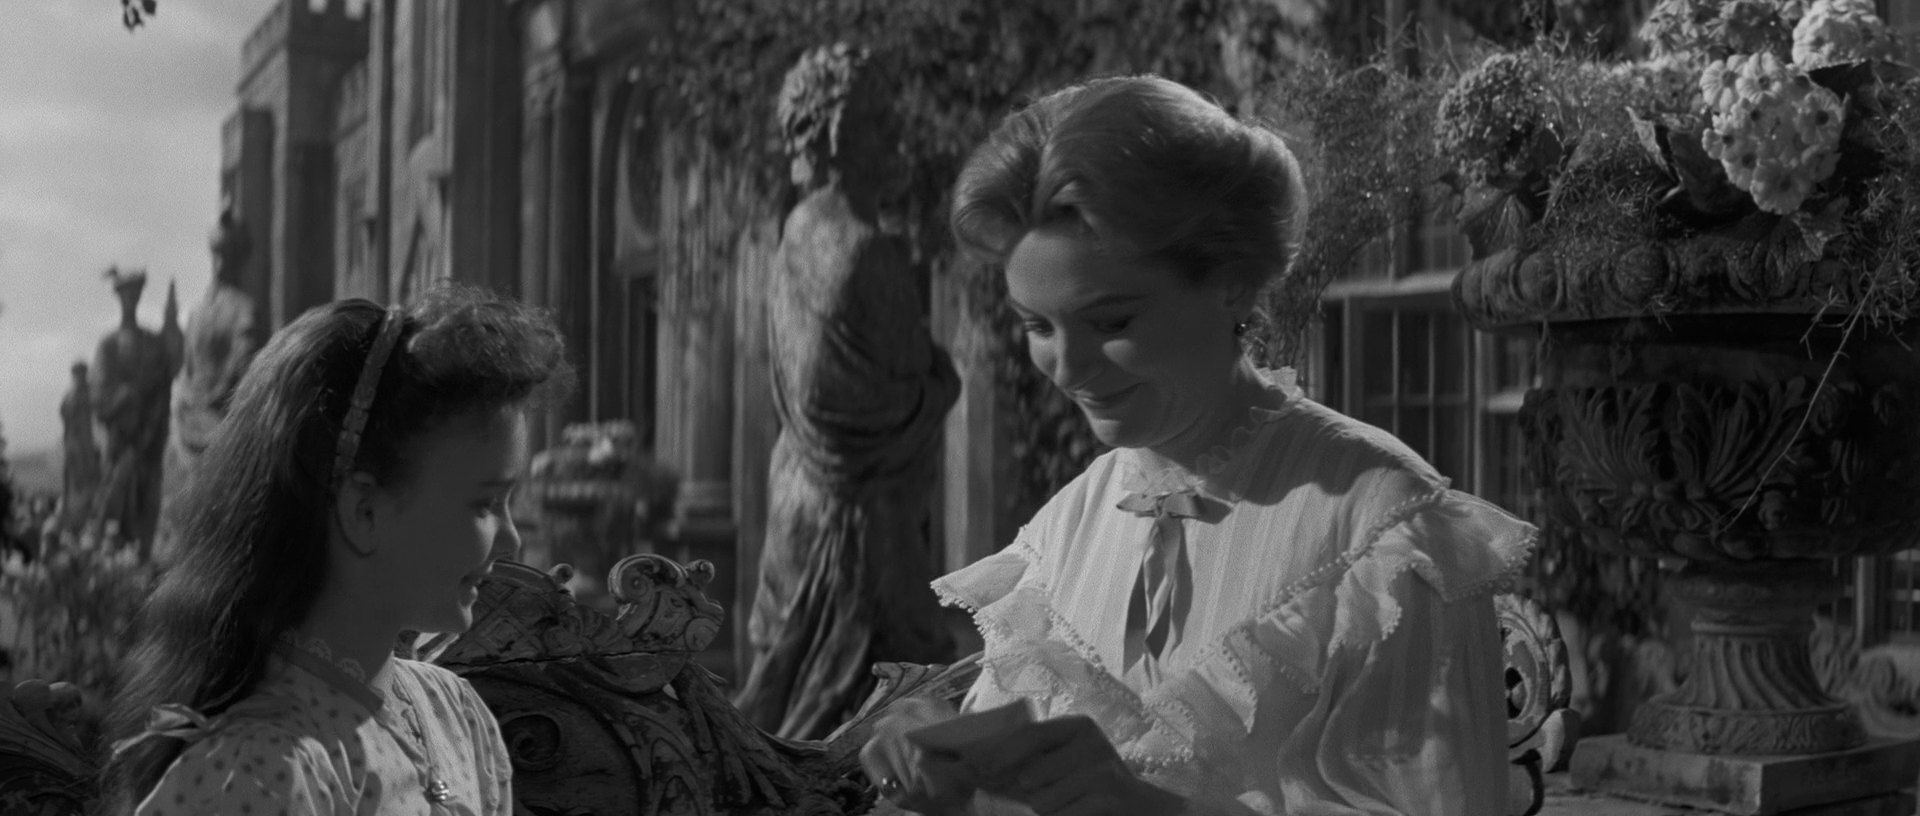 ޹/ The.Innocents.1961.REMASTERED.1080p.BluRay.X264-AMIABLE 6.56GB-4.png